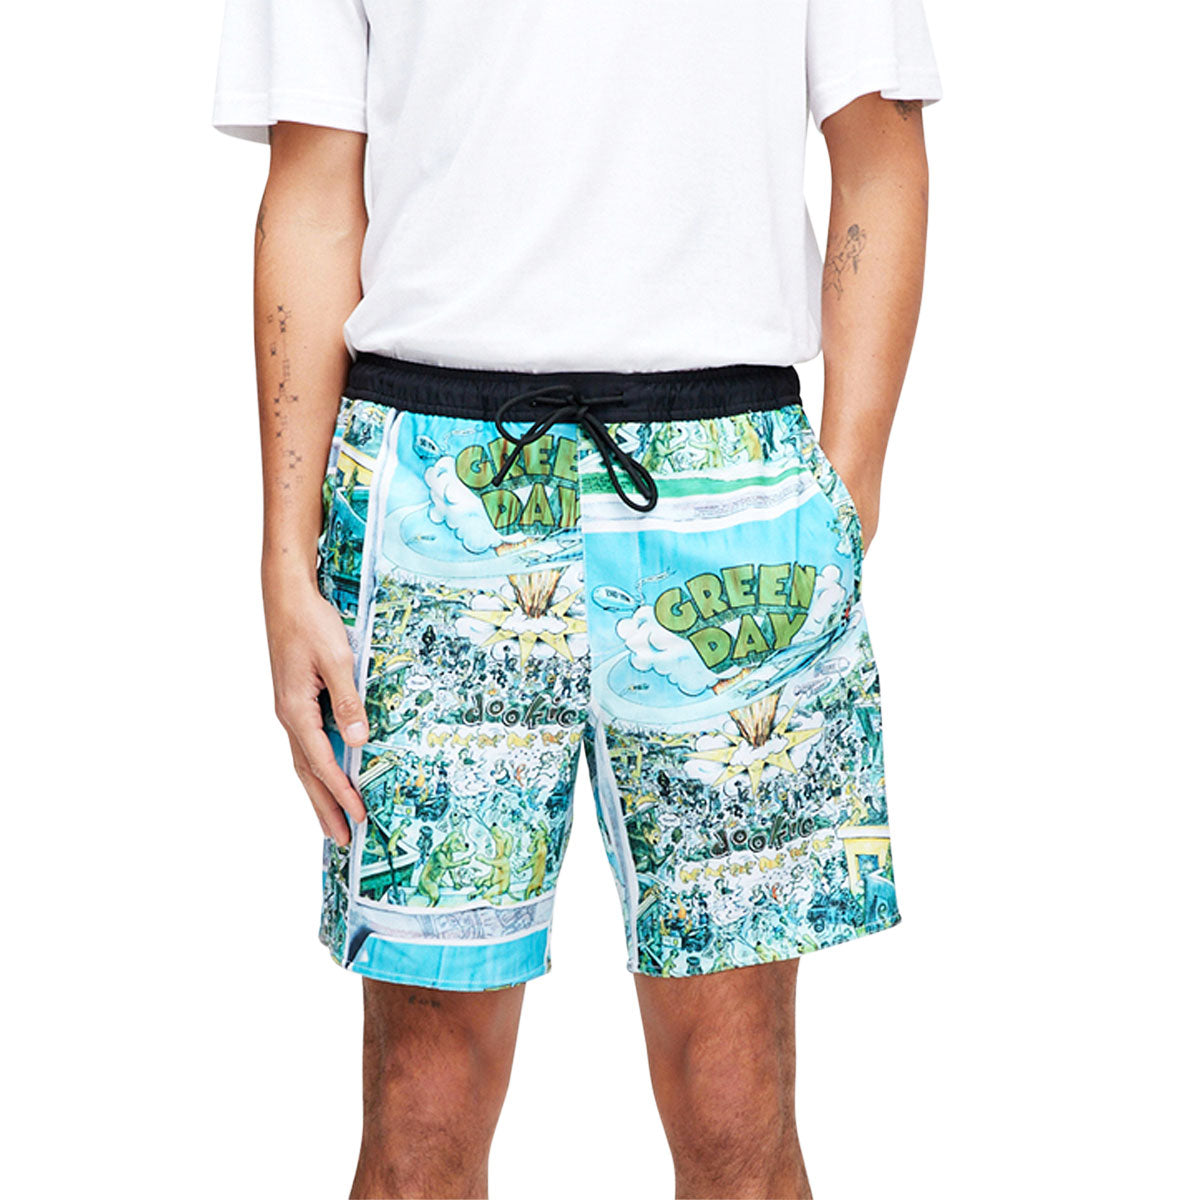 Stance Green Day Complex Shorts - Multi image 2